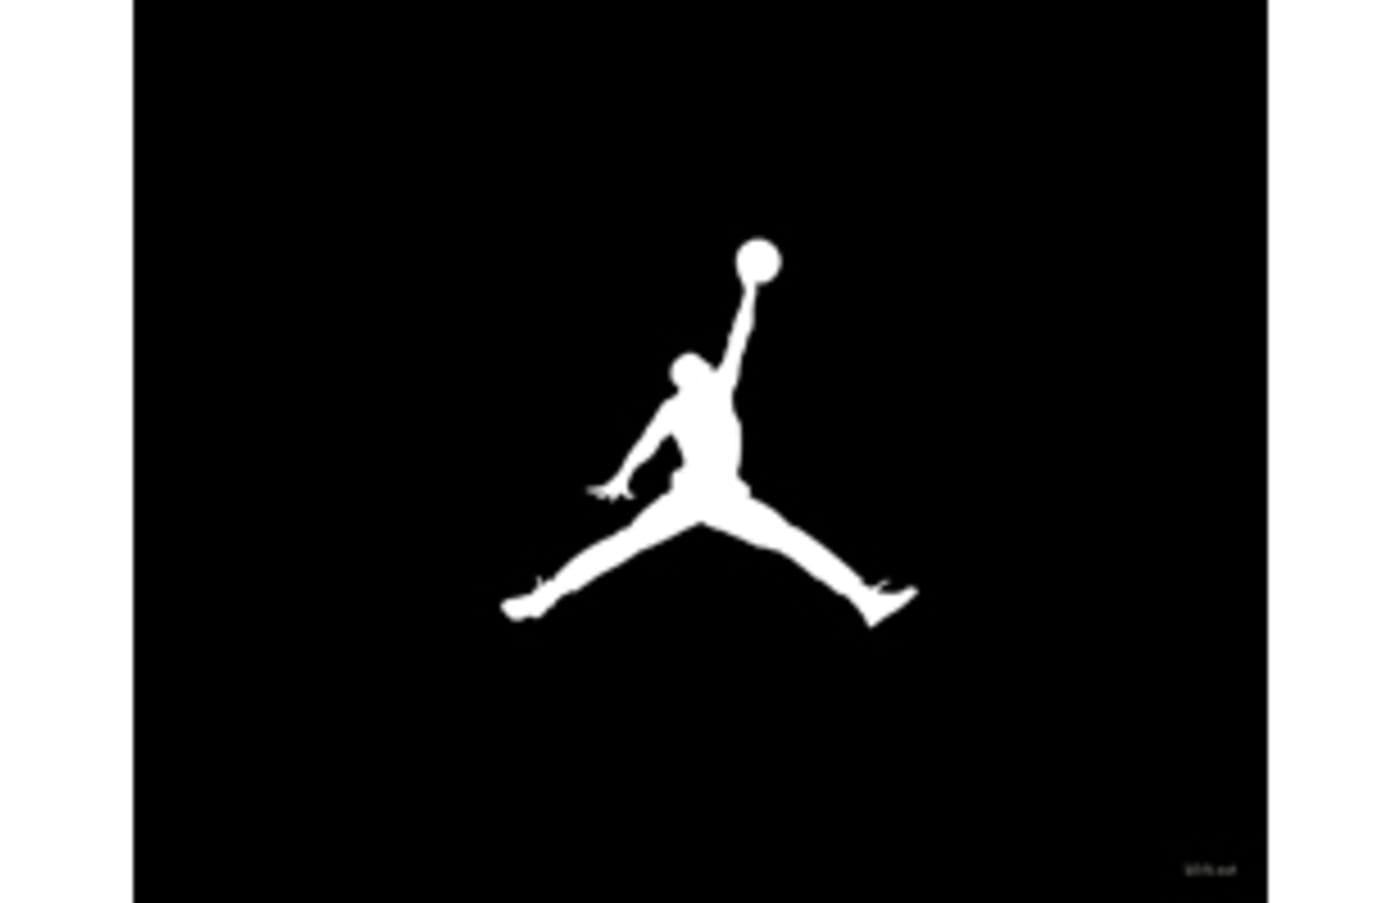 Jumpman: Find The Latest Jumpman Stories, News & Features